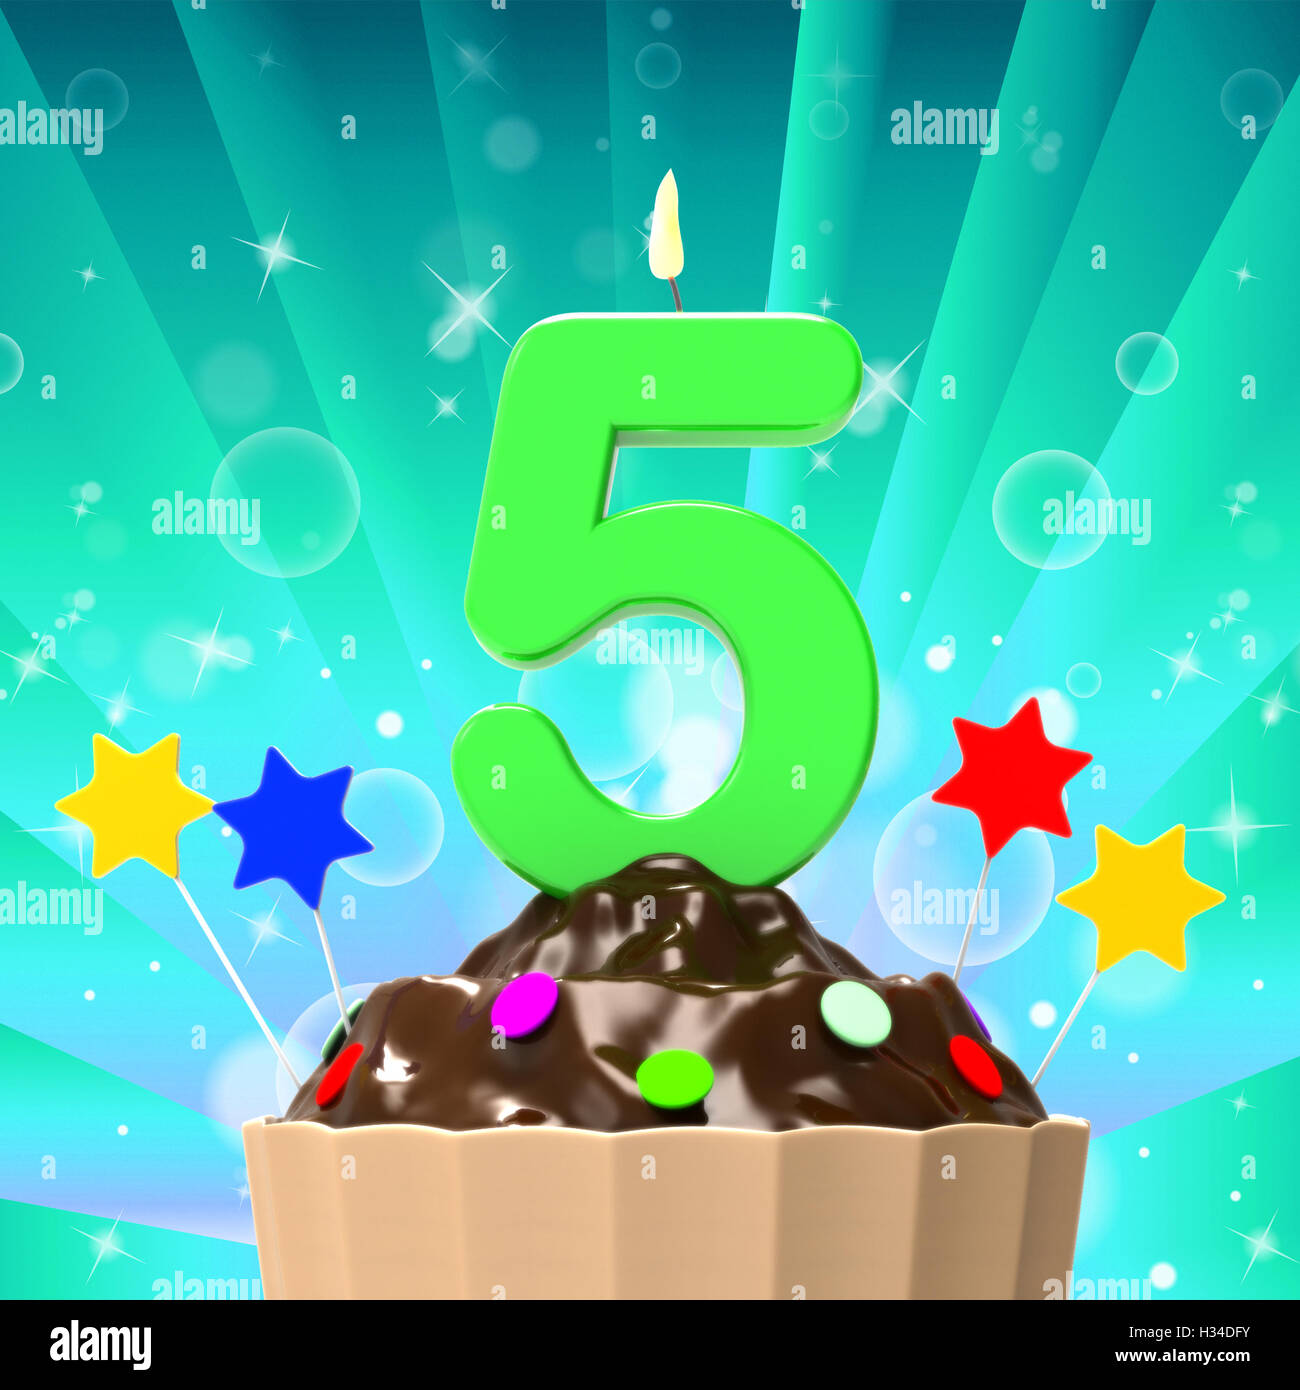 Five Candle On Cupcake Means Happiness And Celebration Stock Photo